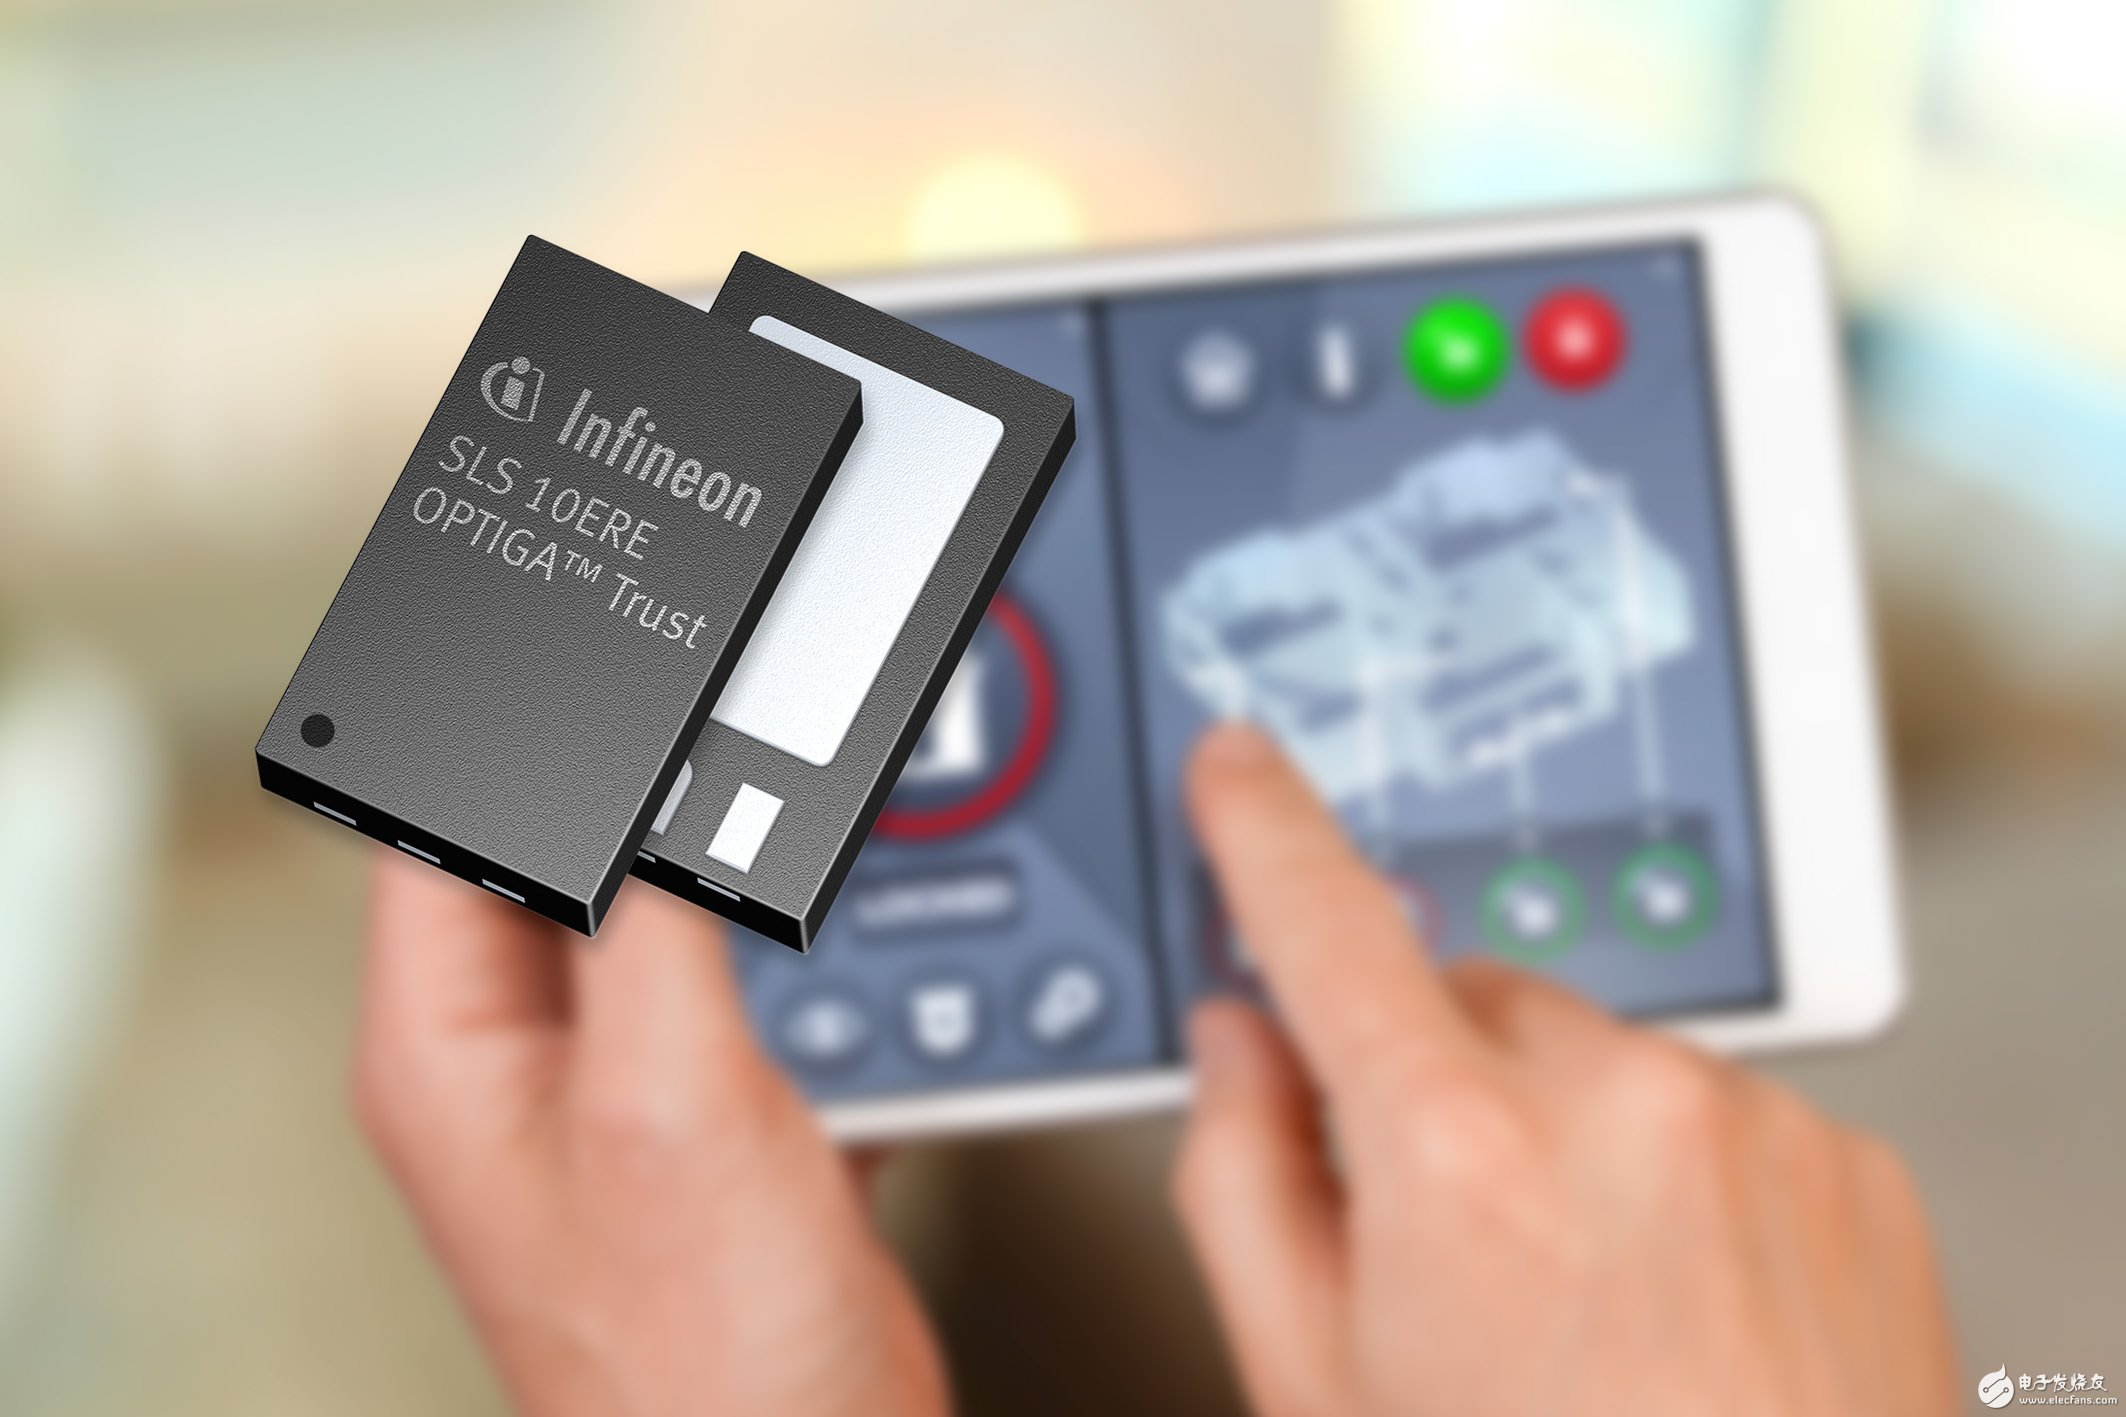 Infineon Introduces "iBadge" Device Identity Management System for Smart Home Solutions at Embedded World Exhibition